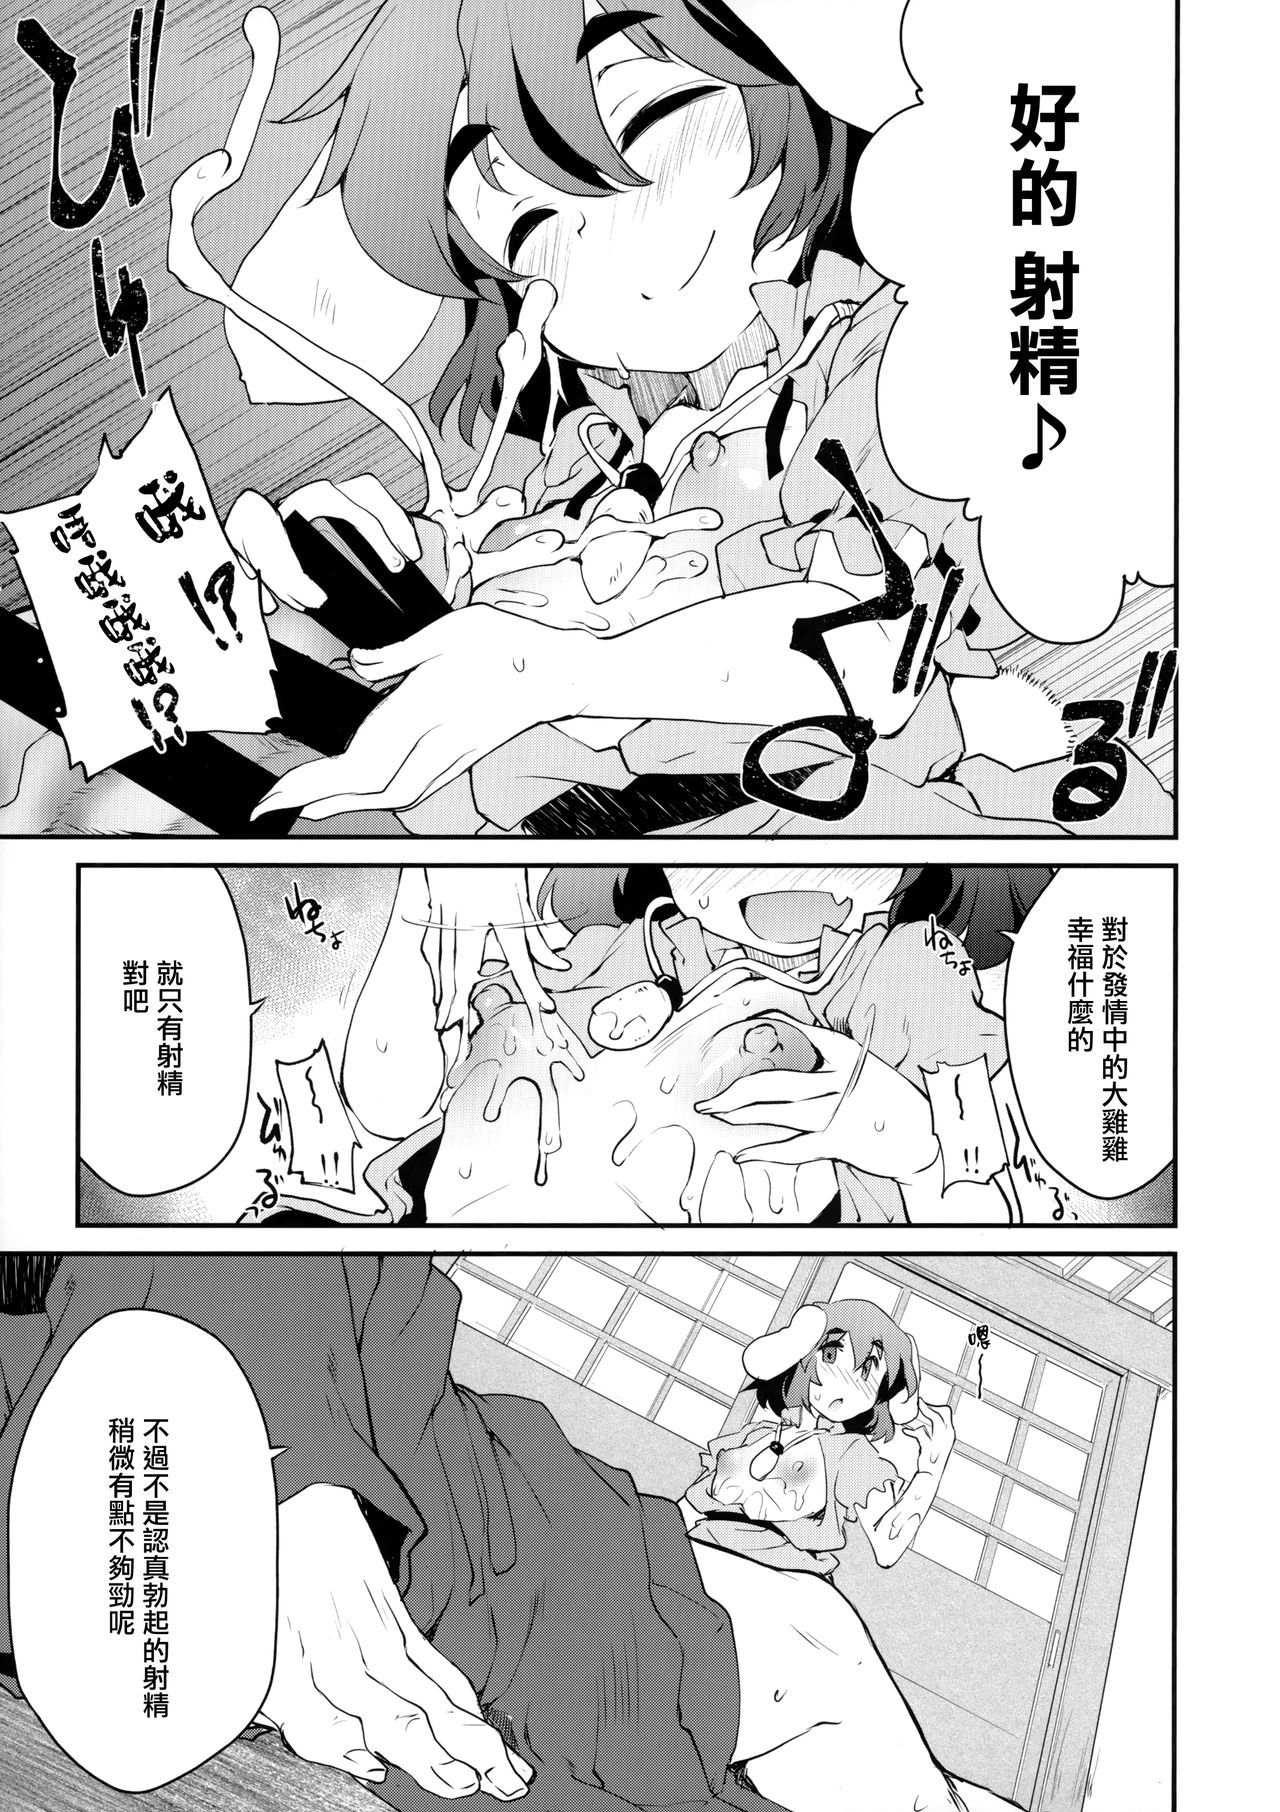 (Reitaisai 16) [IncluDe (Foolest)] Cum Cum Happiness Heart (Touhou Project) [Chinese] [命蓮寺漢化組] (例大祭16) [IncluDe (ふぅりすと)] Cum Cum Happiness Heart (東方Project) [中国翻訳]